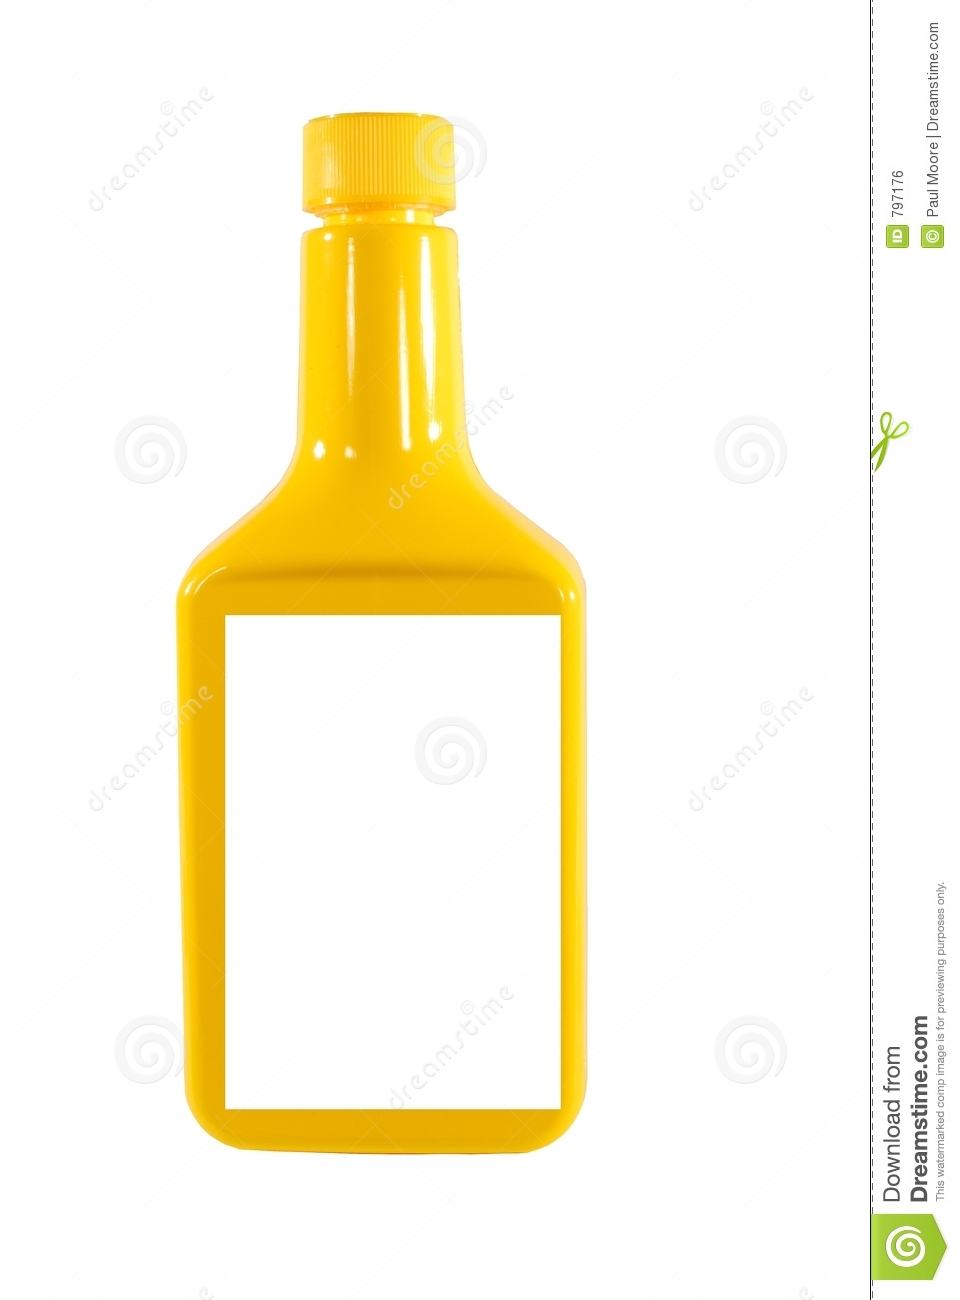 Pint Container Royalty Free Stock Image   Image  797176